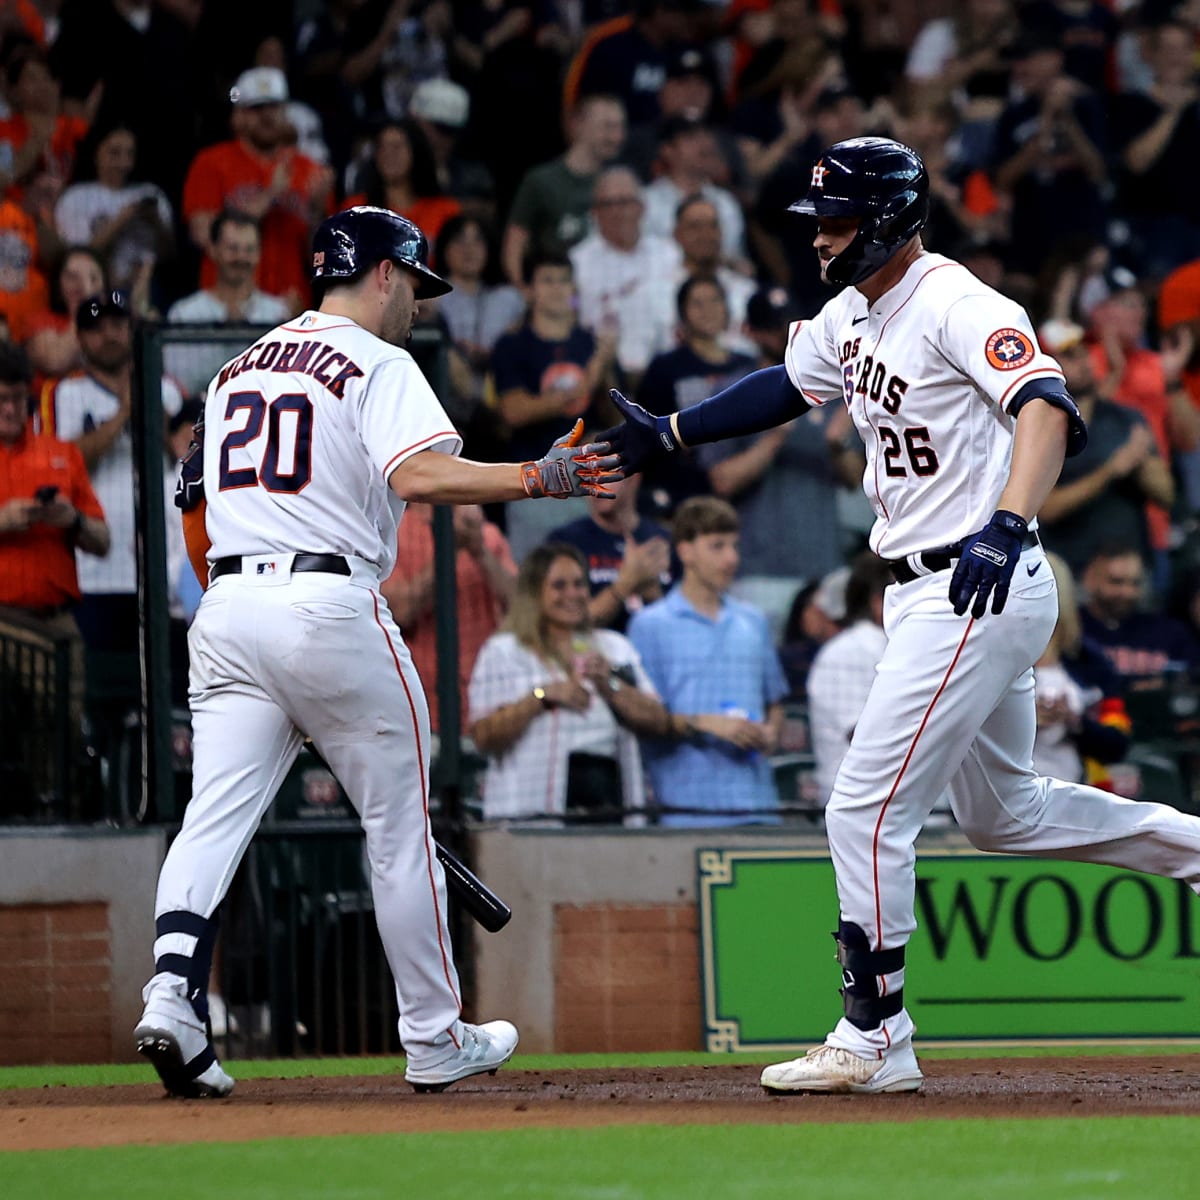 Houston Astros roster: Time for a shakeup, promote this outfielder